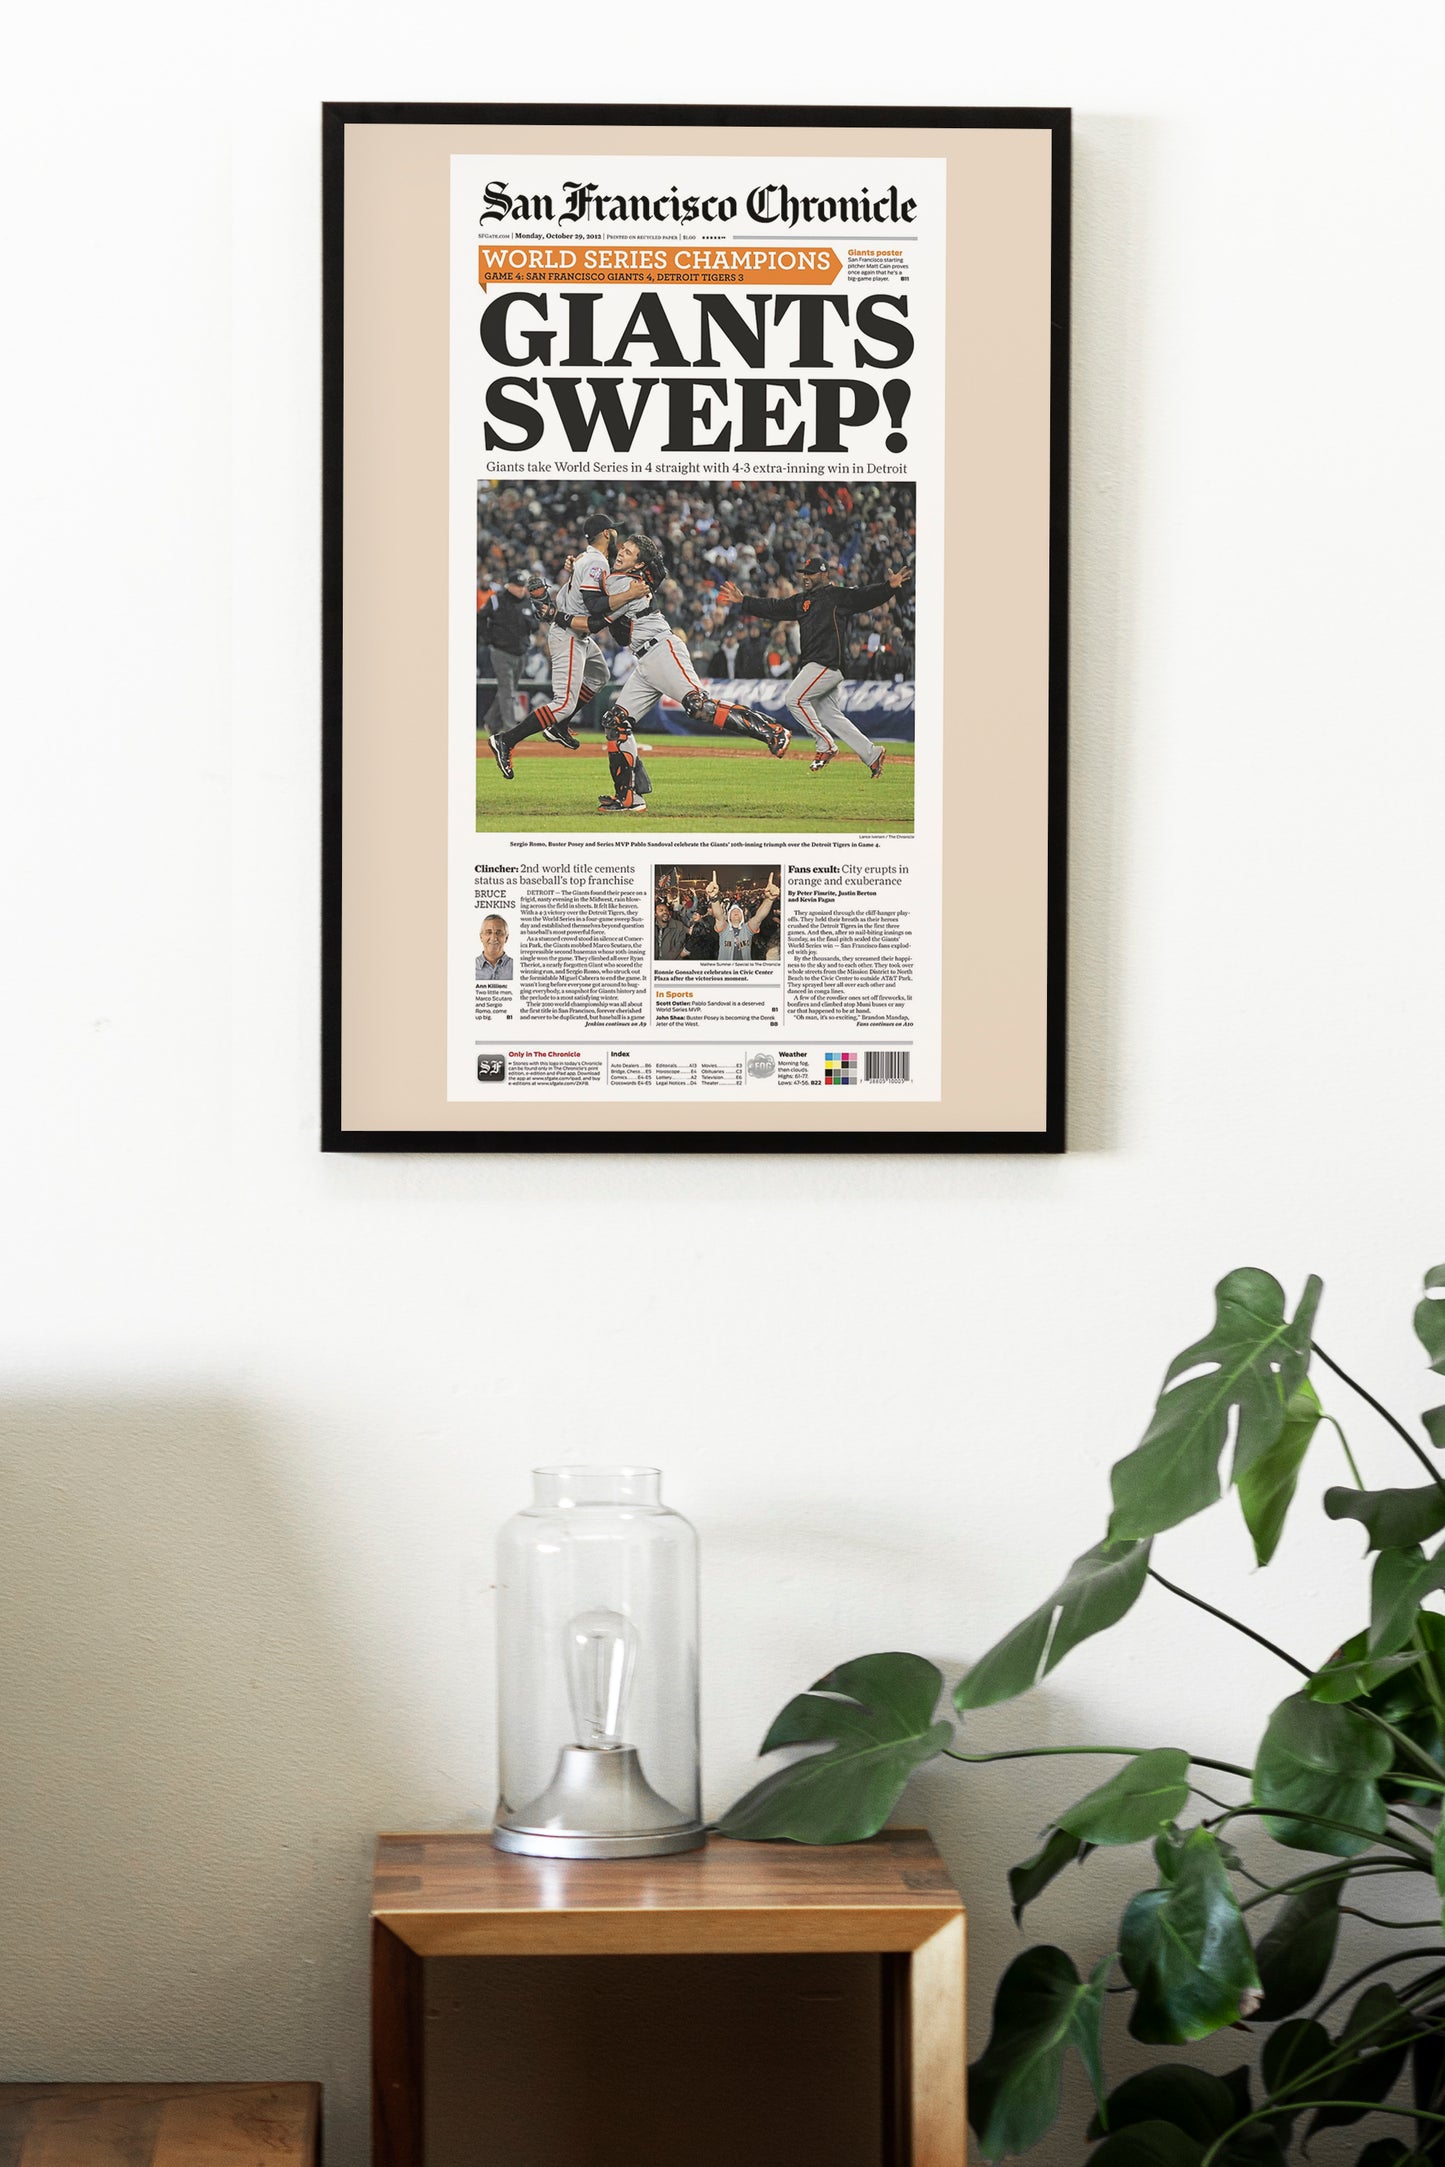 San Francisco Giants 2012 World Series MLB Champions Front Cover San Francisco Chronicle Newspaper Poster